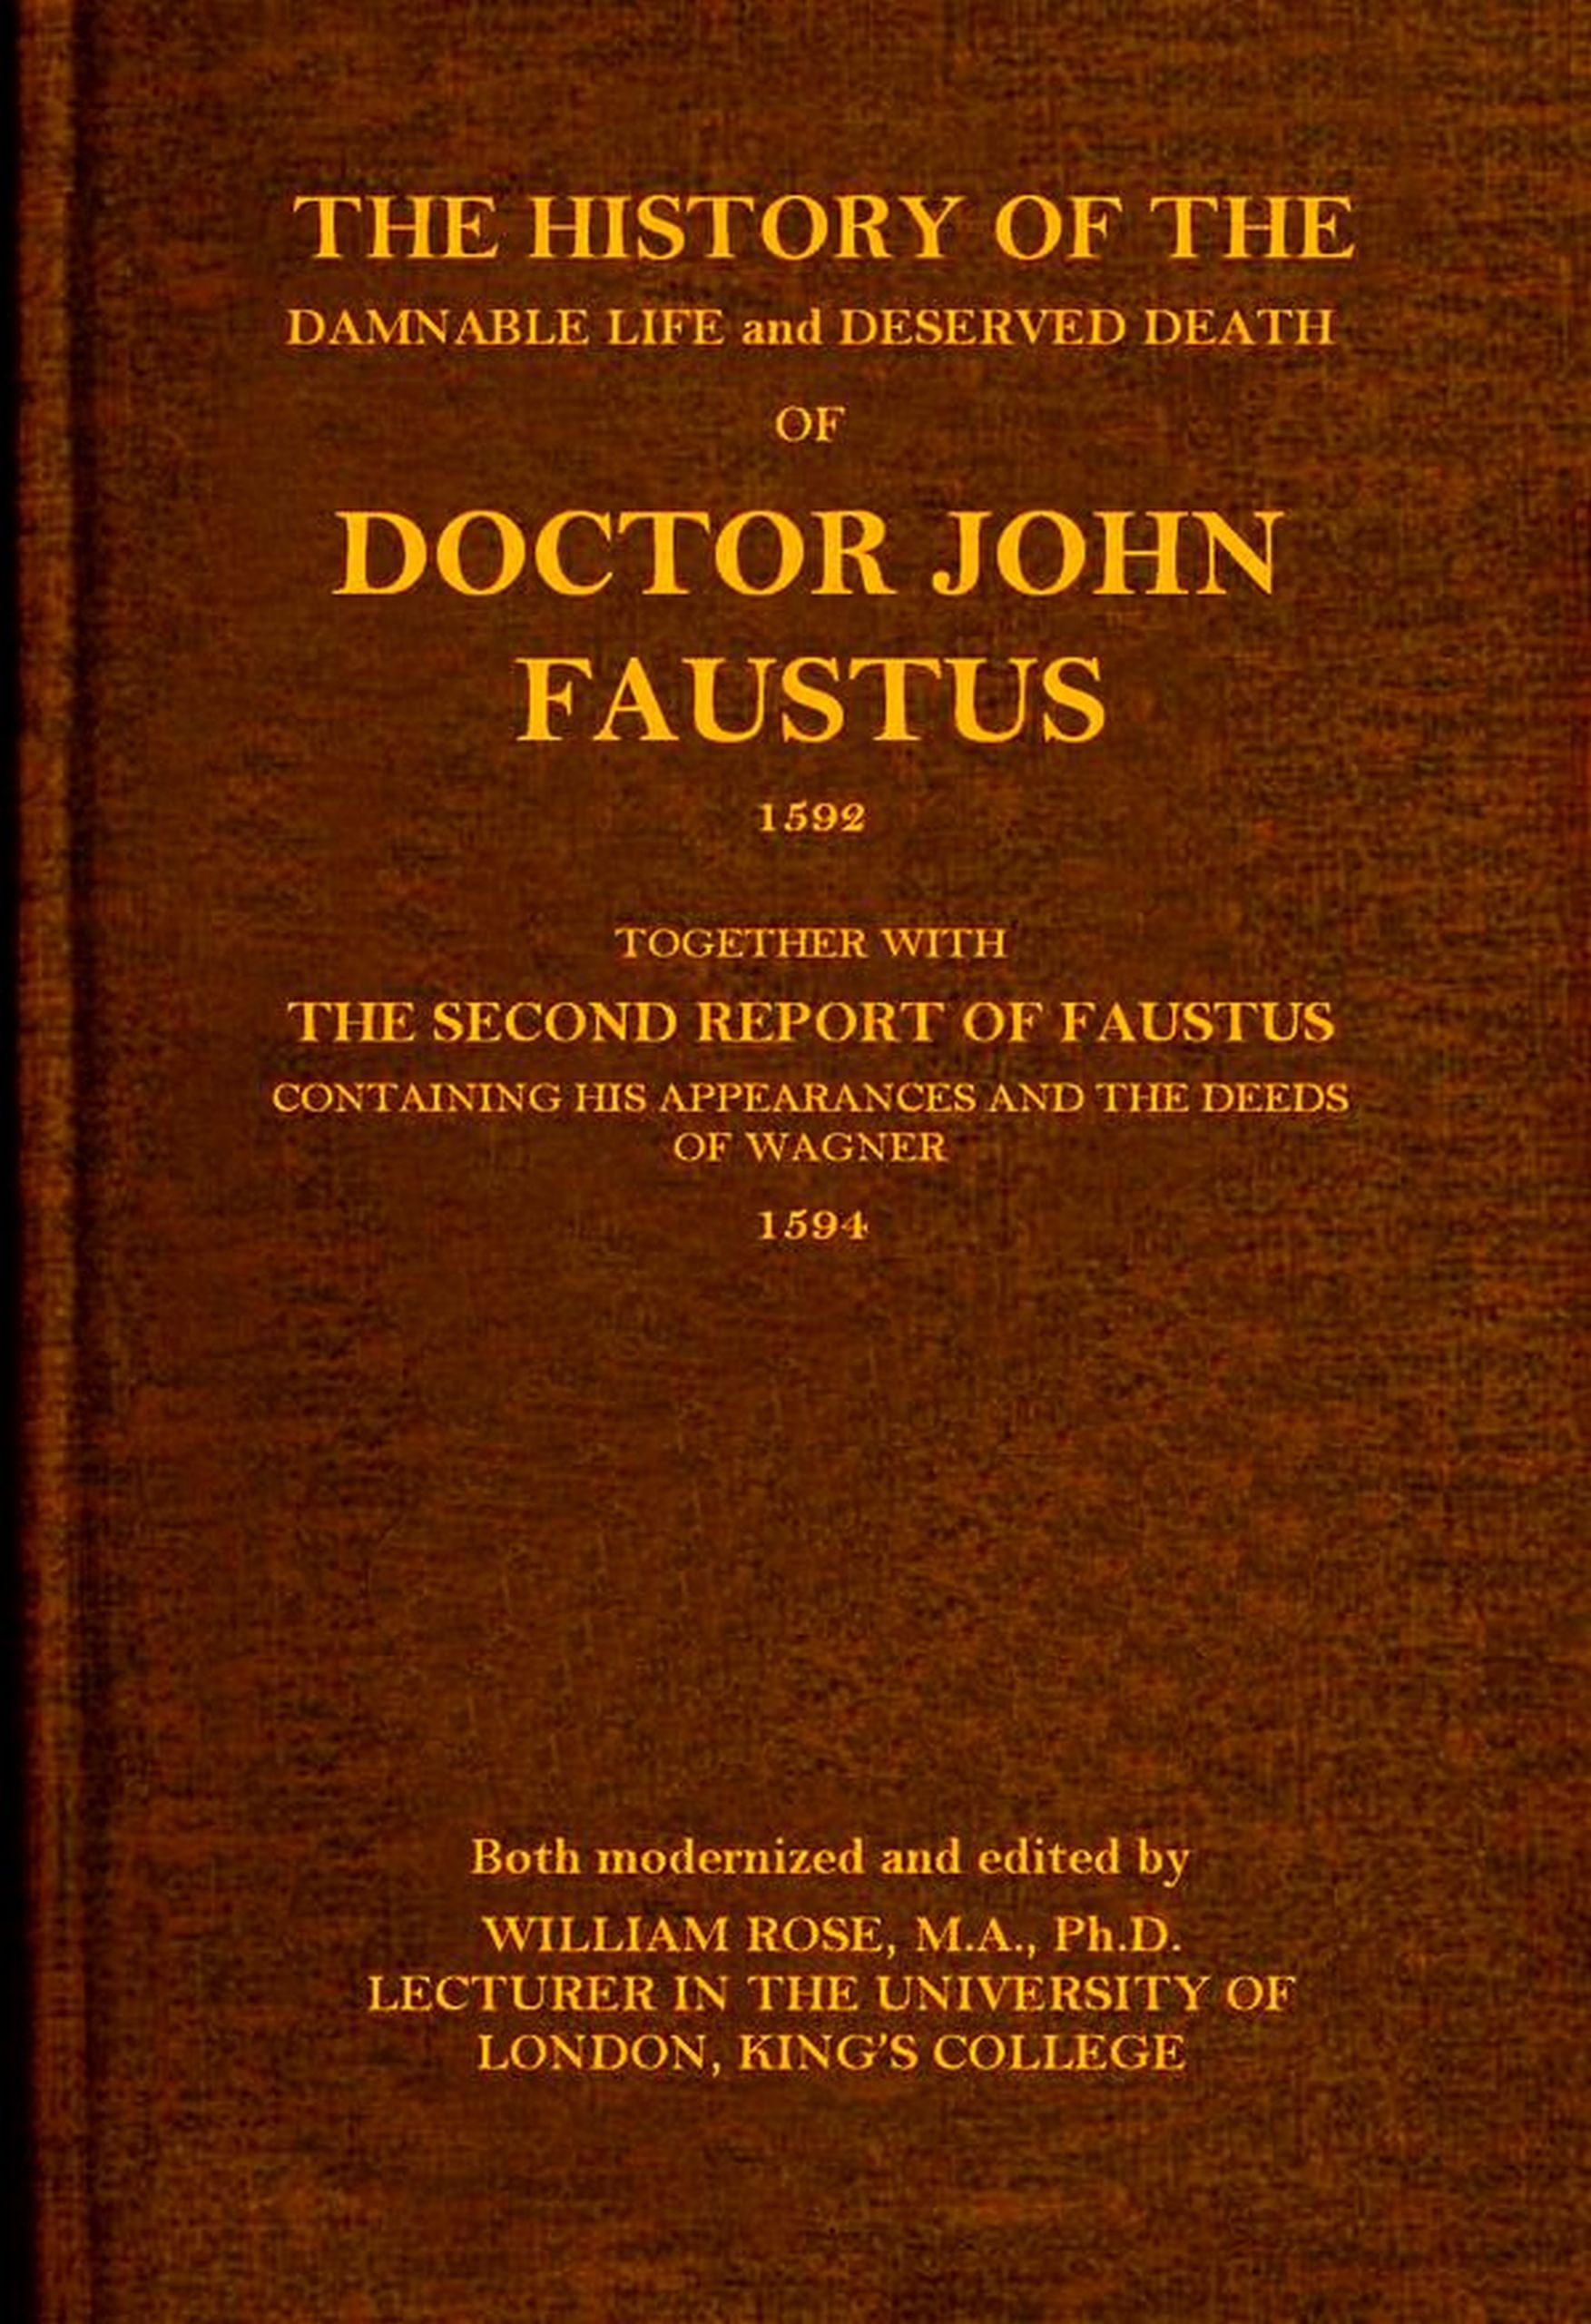 The history of the damnable life and deserved death of Doctor John Faustus, 1592, together with The second report of Faustus, containing his appearances and the deeds of Wagner, 1594.